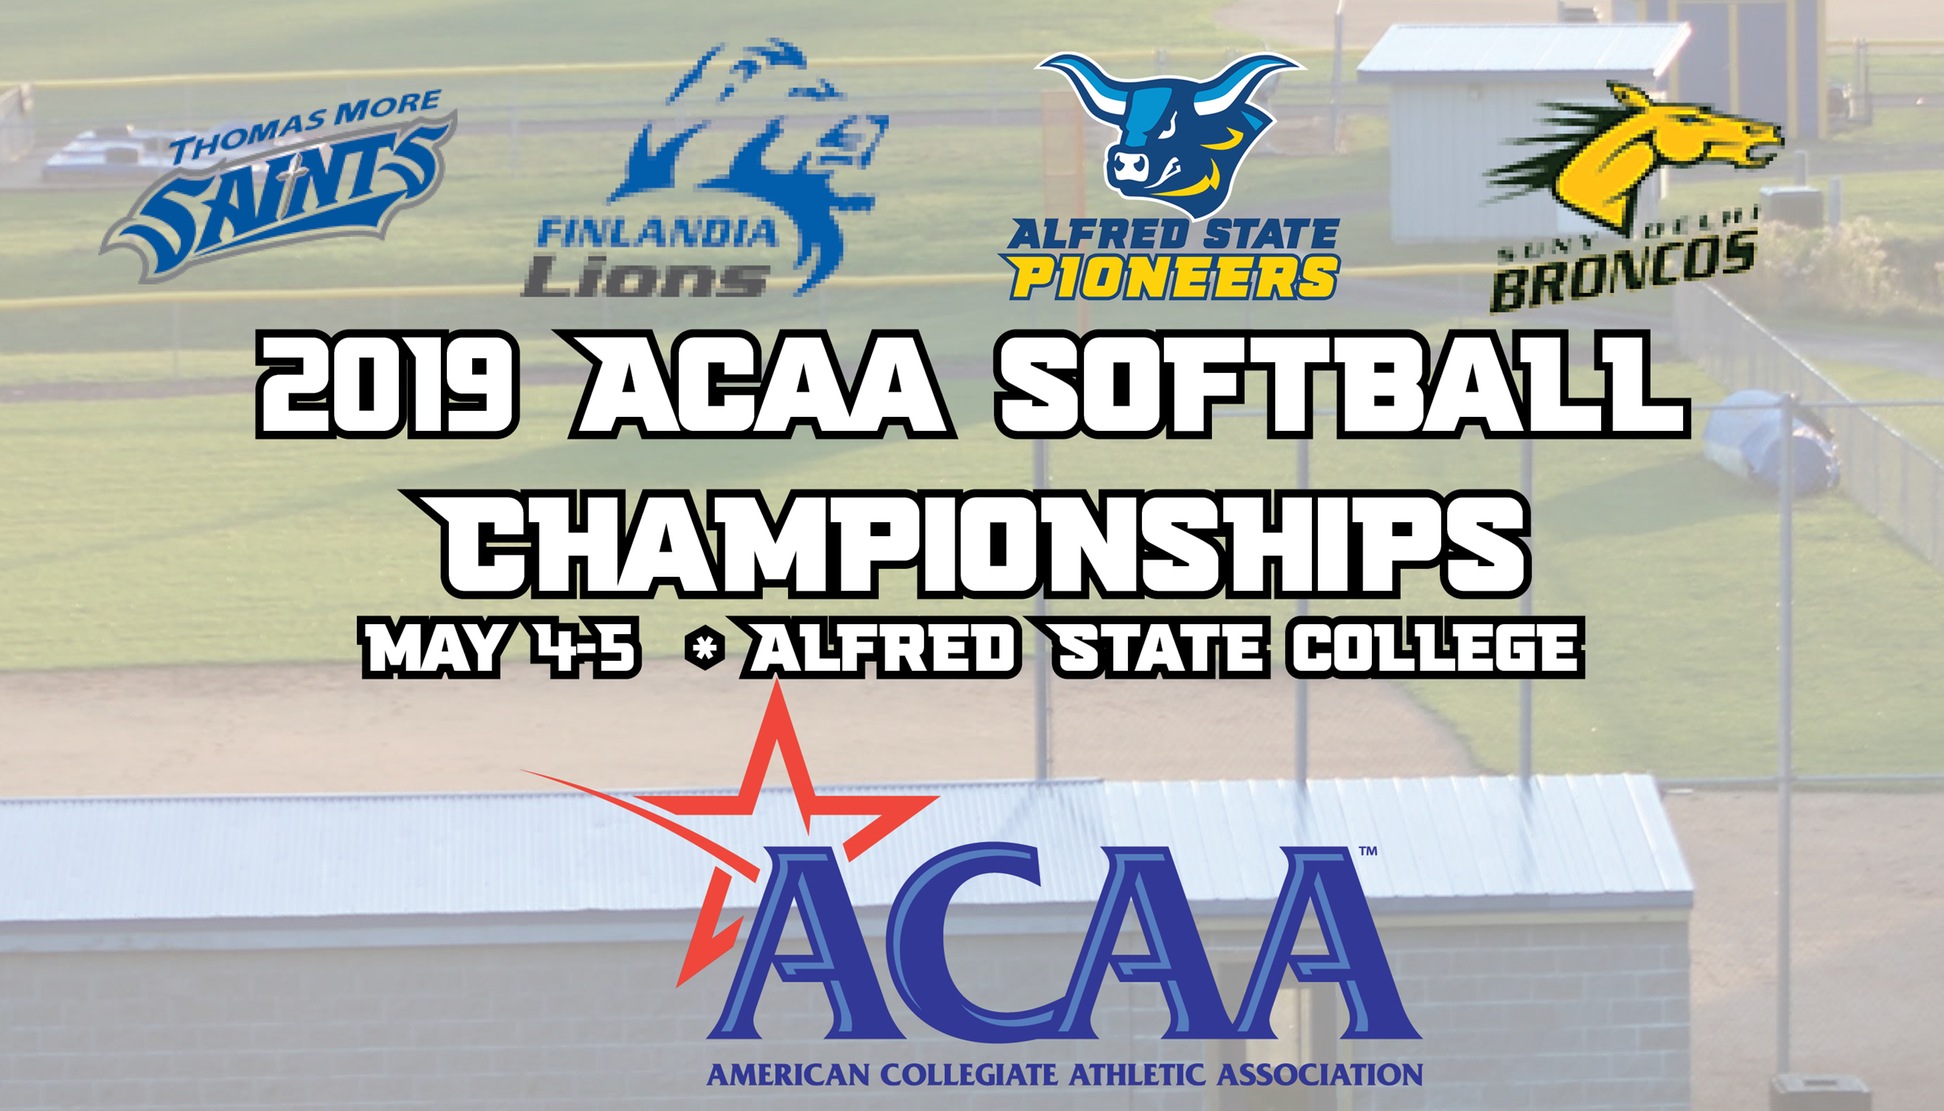 Alfred State hosts the ACAA Tournament and will be the #3 seed